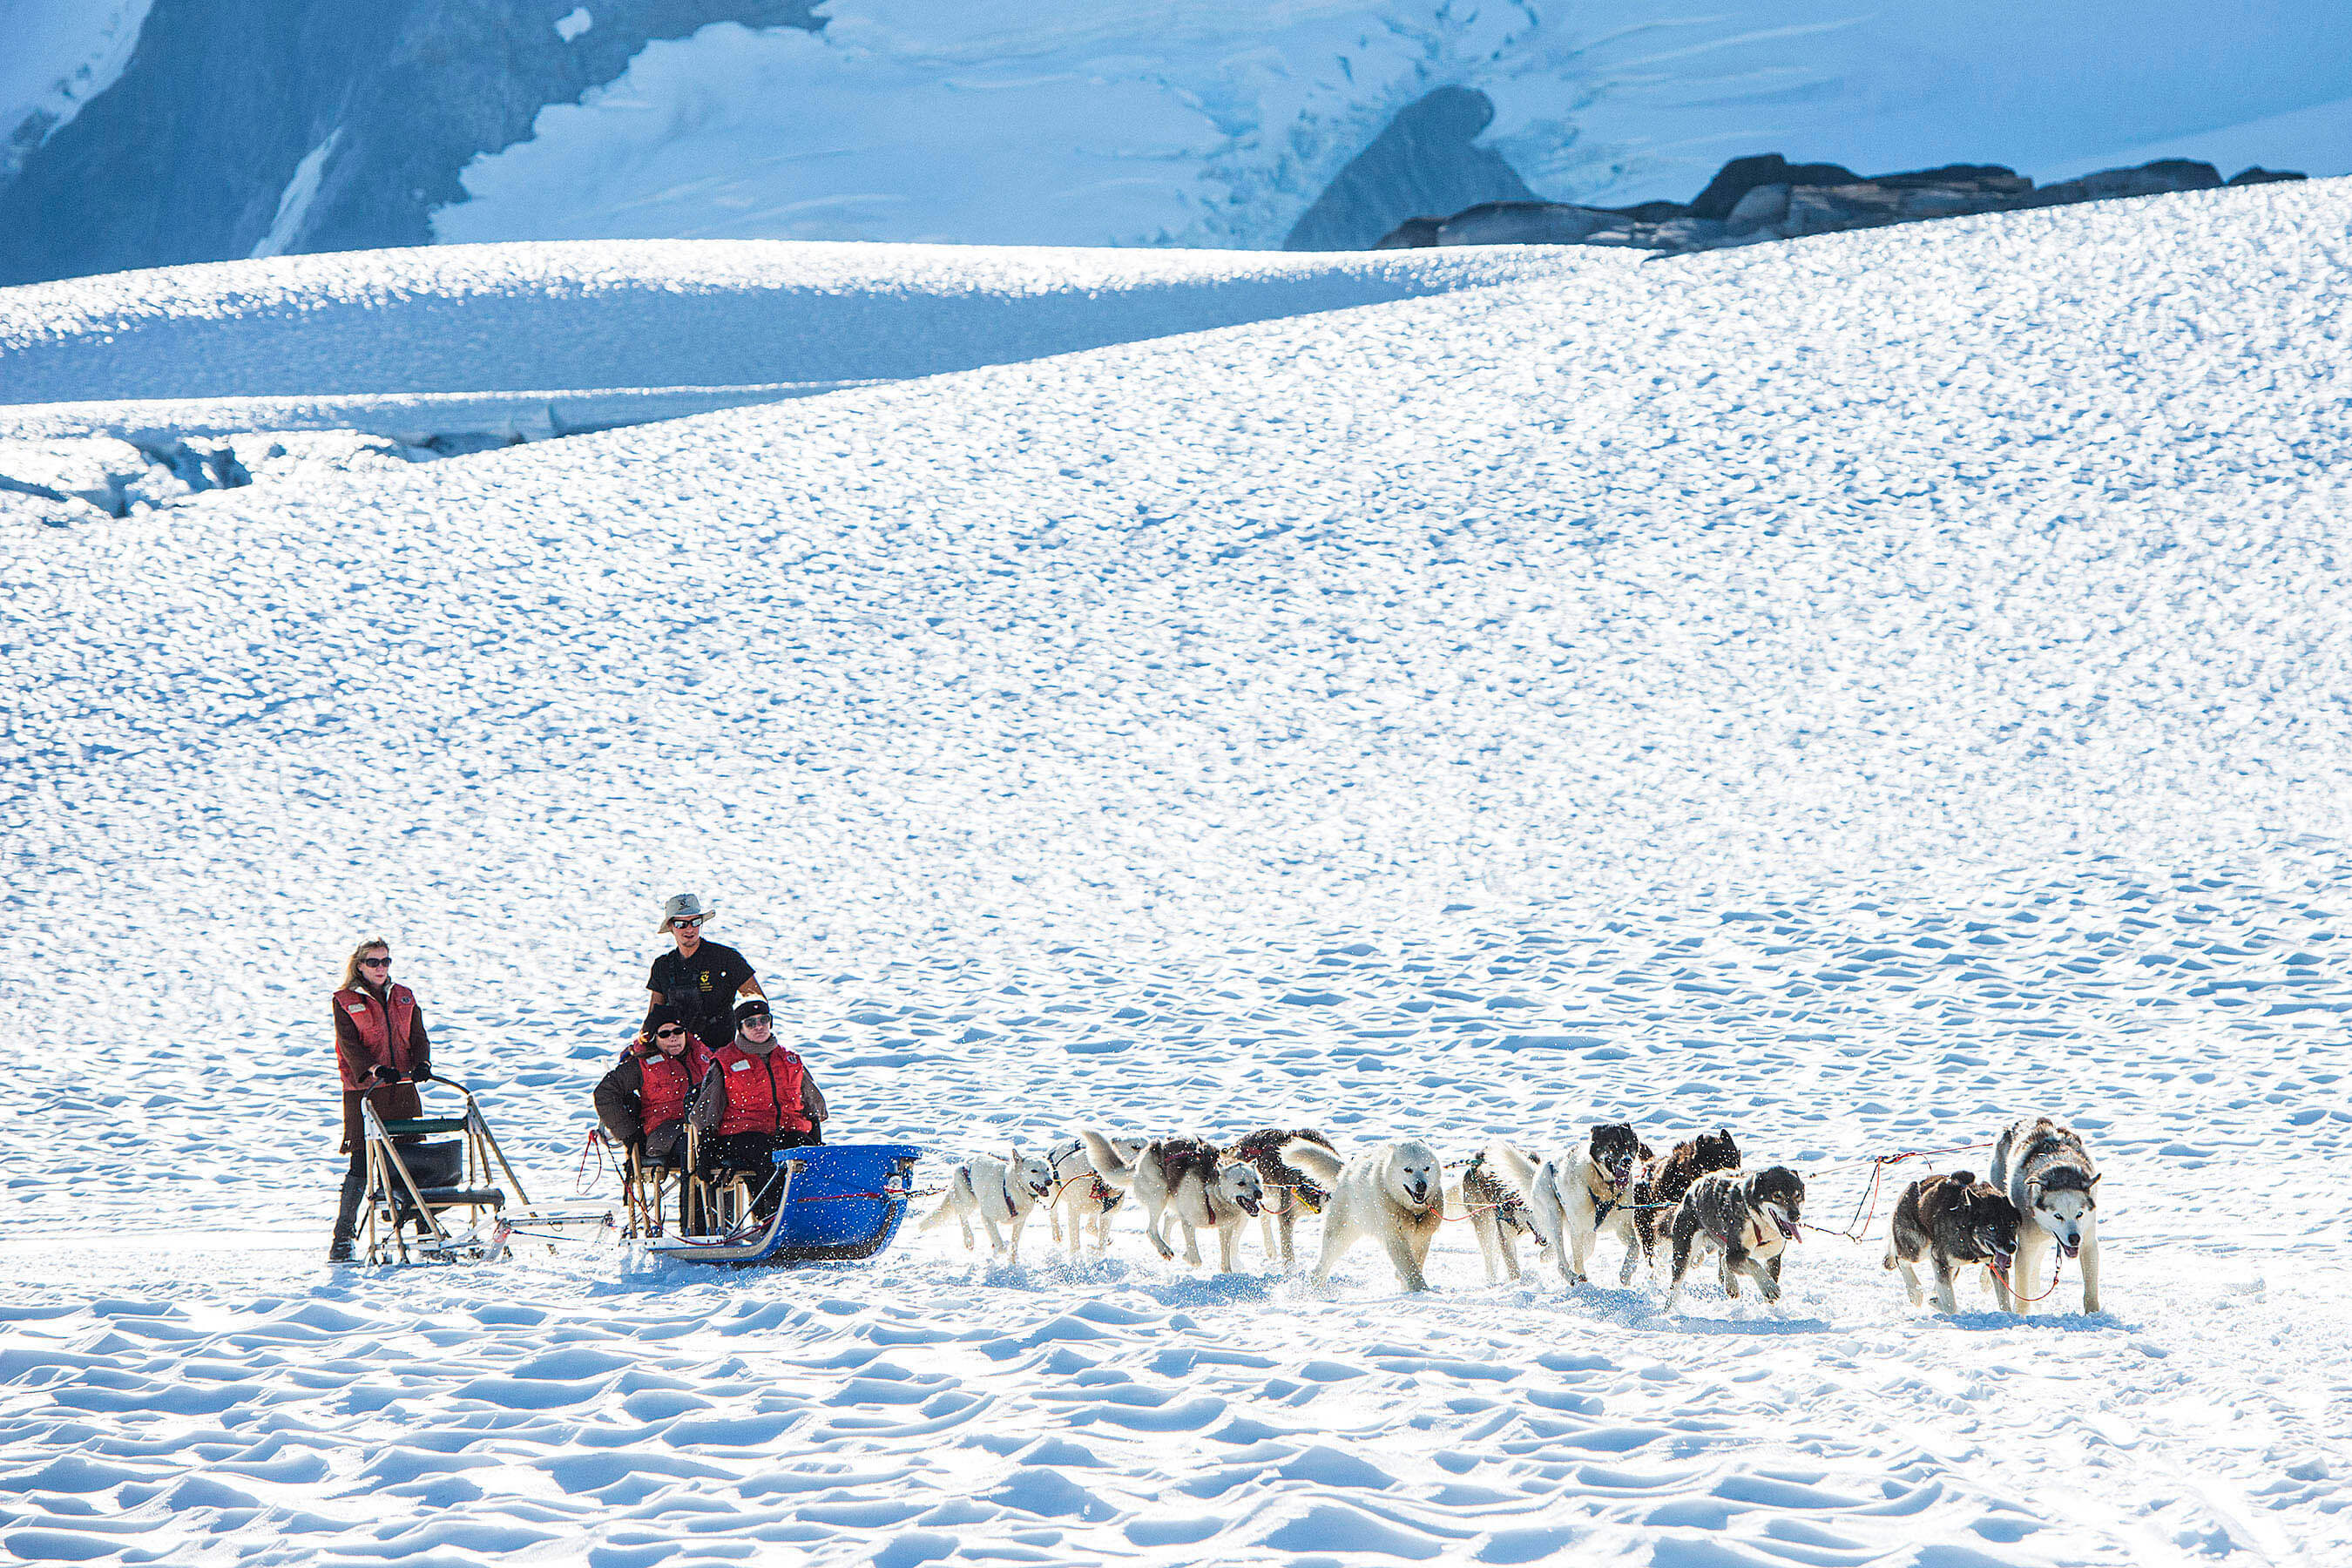 As part of the Alaska itinerary, Disney Cruise Line guests explore Musher’s Camp at the Klondike Gold Rush National Historical Park in Skagway. Guests meet the mushers and sled dogs and are whisked on a thrilling ride through Alaska’s temperate rainforest by the husky team. (Matt Stroshane, photographer)